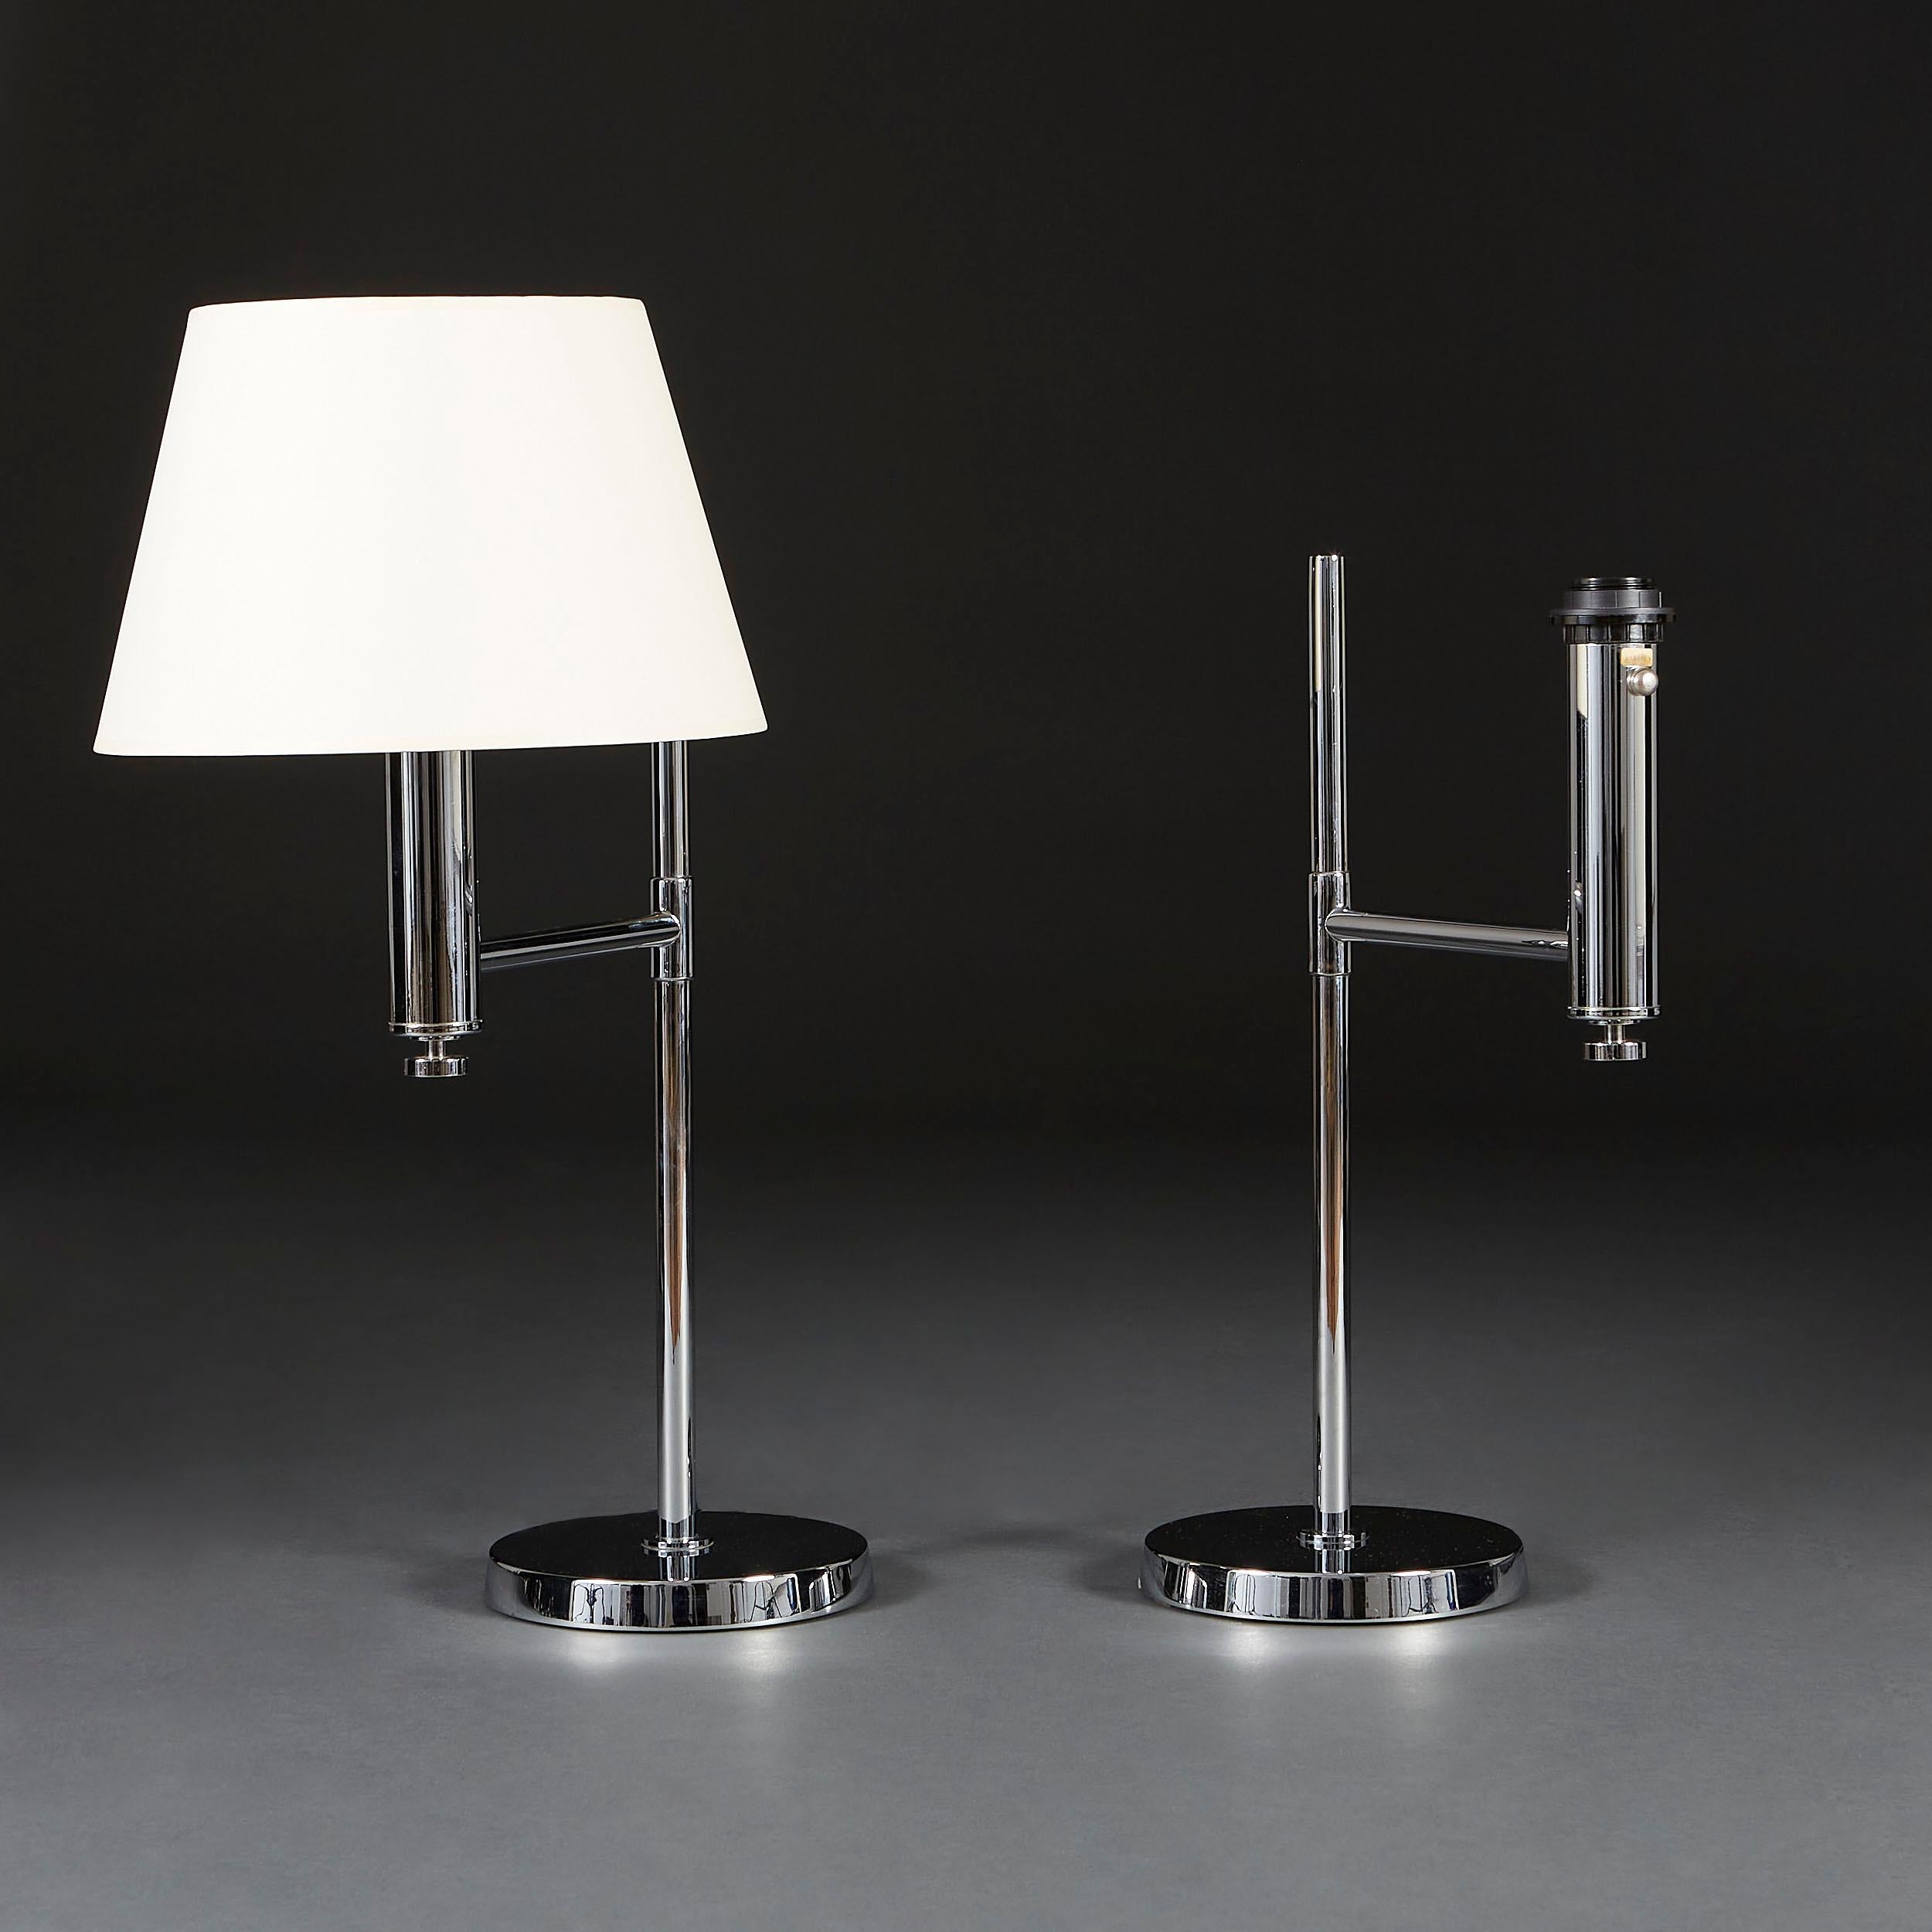 A pair of unusual chrome metal lamps with U-form extended arms and circular bases.

Please note: lampshades not included.

Currently wired for the UK.